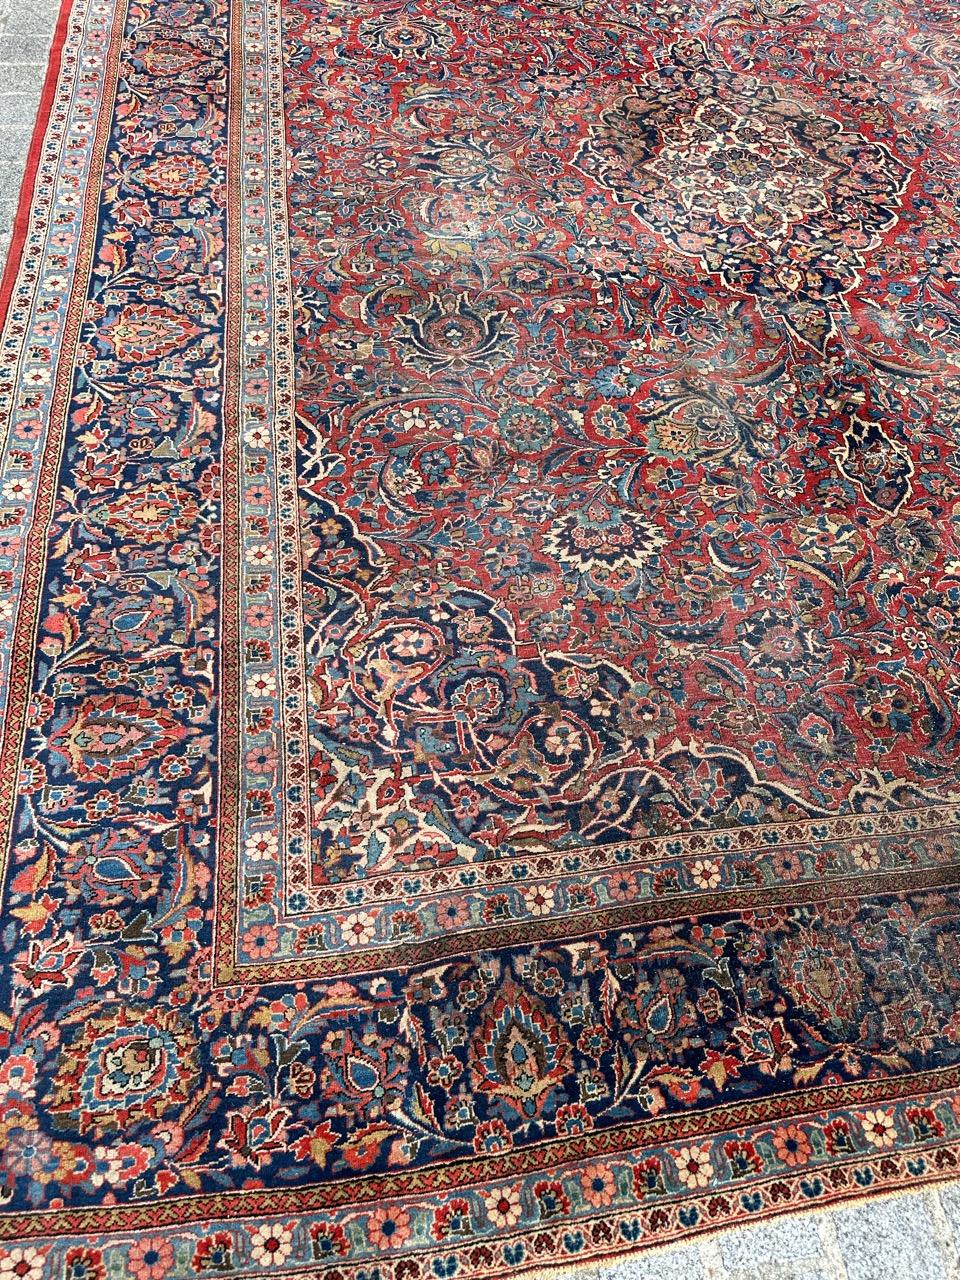 Introducing a Stunning Early 20th Century Large Kashan Rug!

Step into the elegance of the past with this exquisite early 20th-century large Kashan rug. Immerse yourself in its timeless beauty featuring a captivating floral design in rich, natural